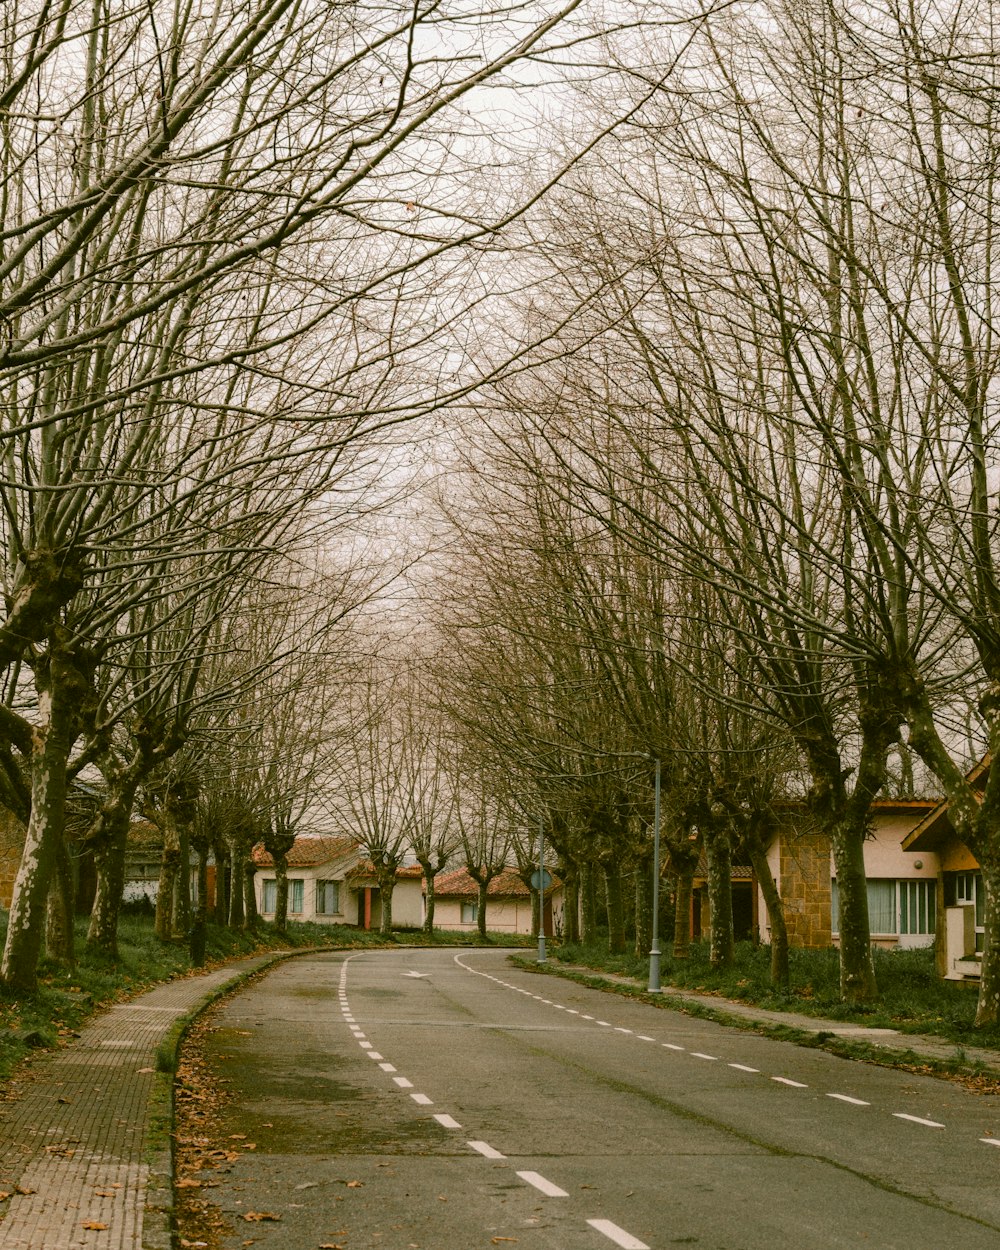 a street lined with houses and trees with no leaves